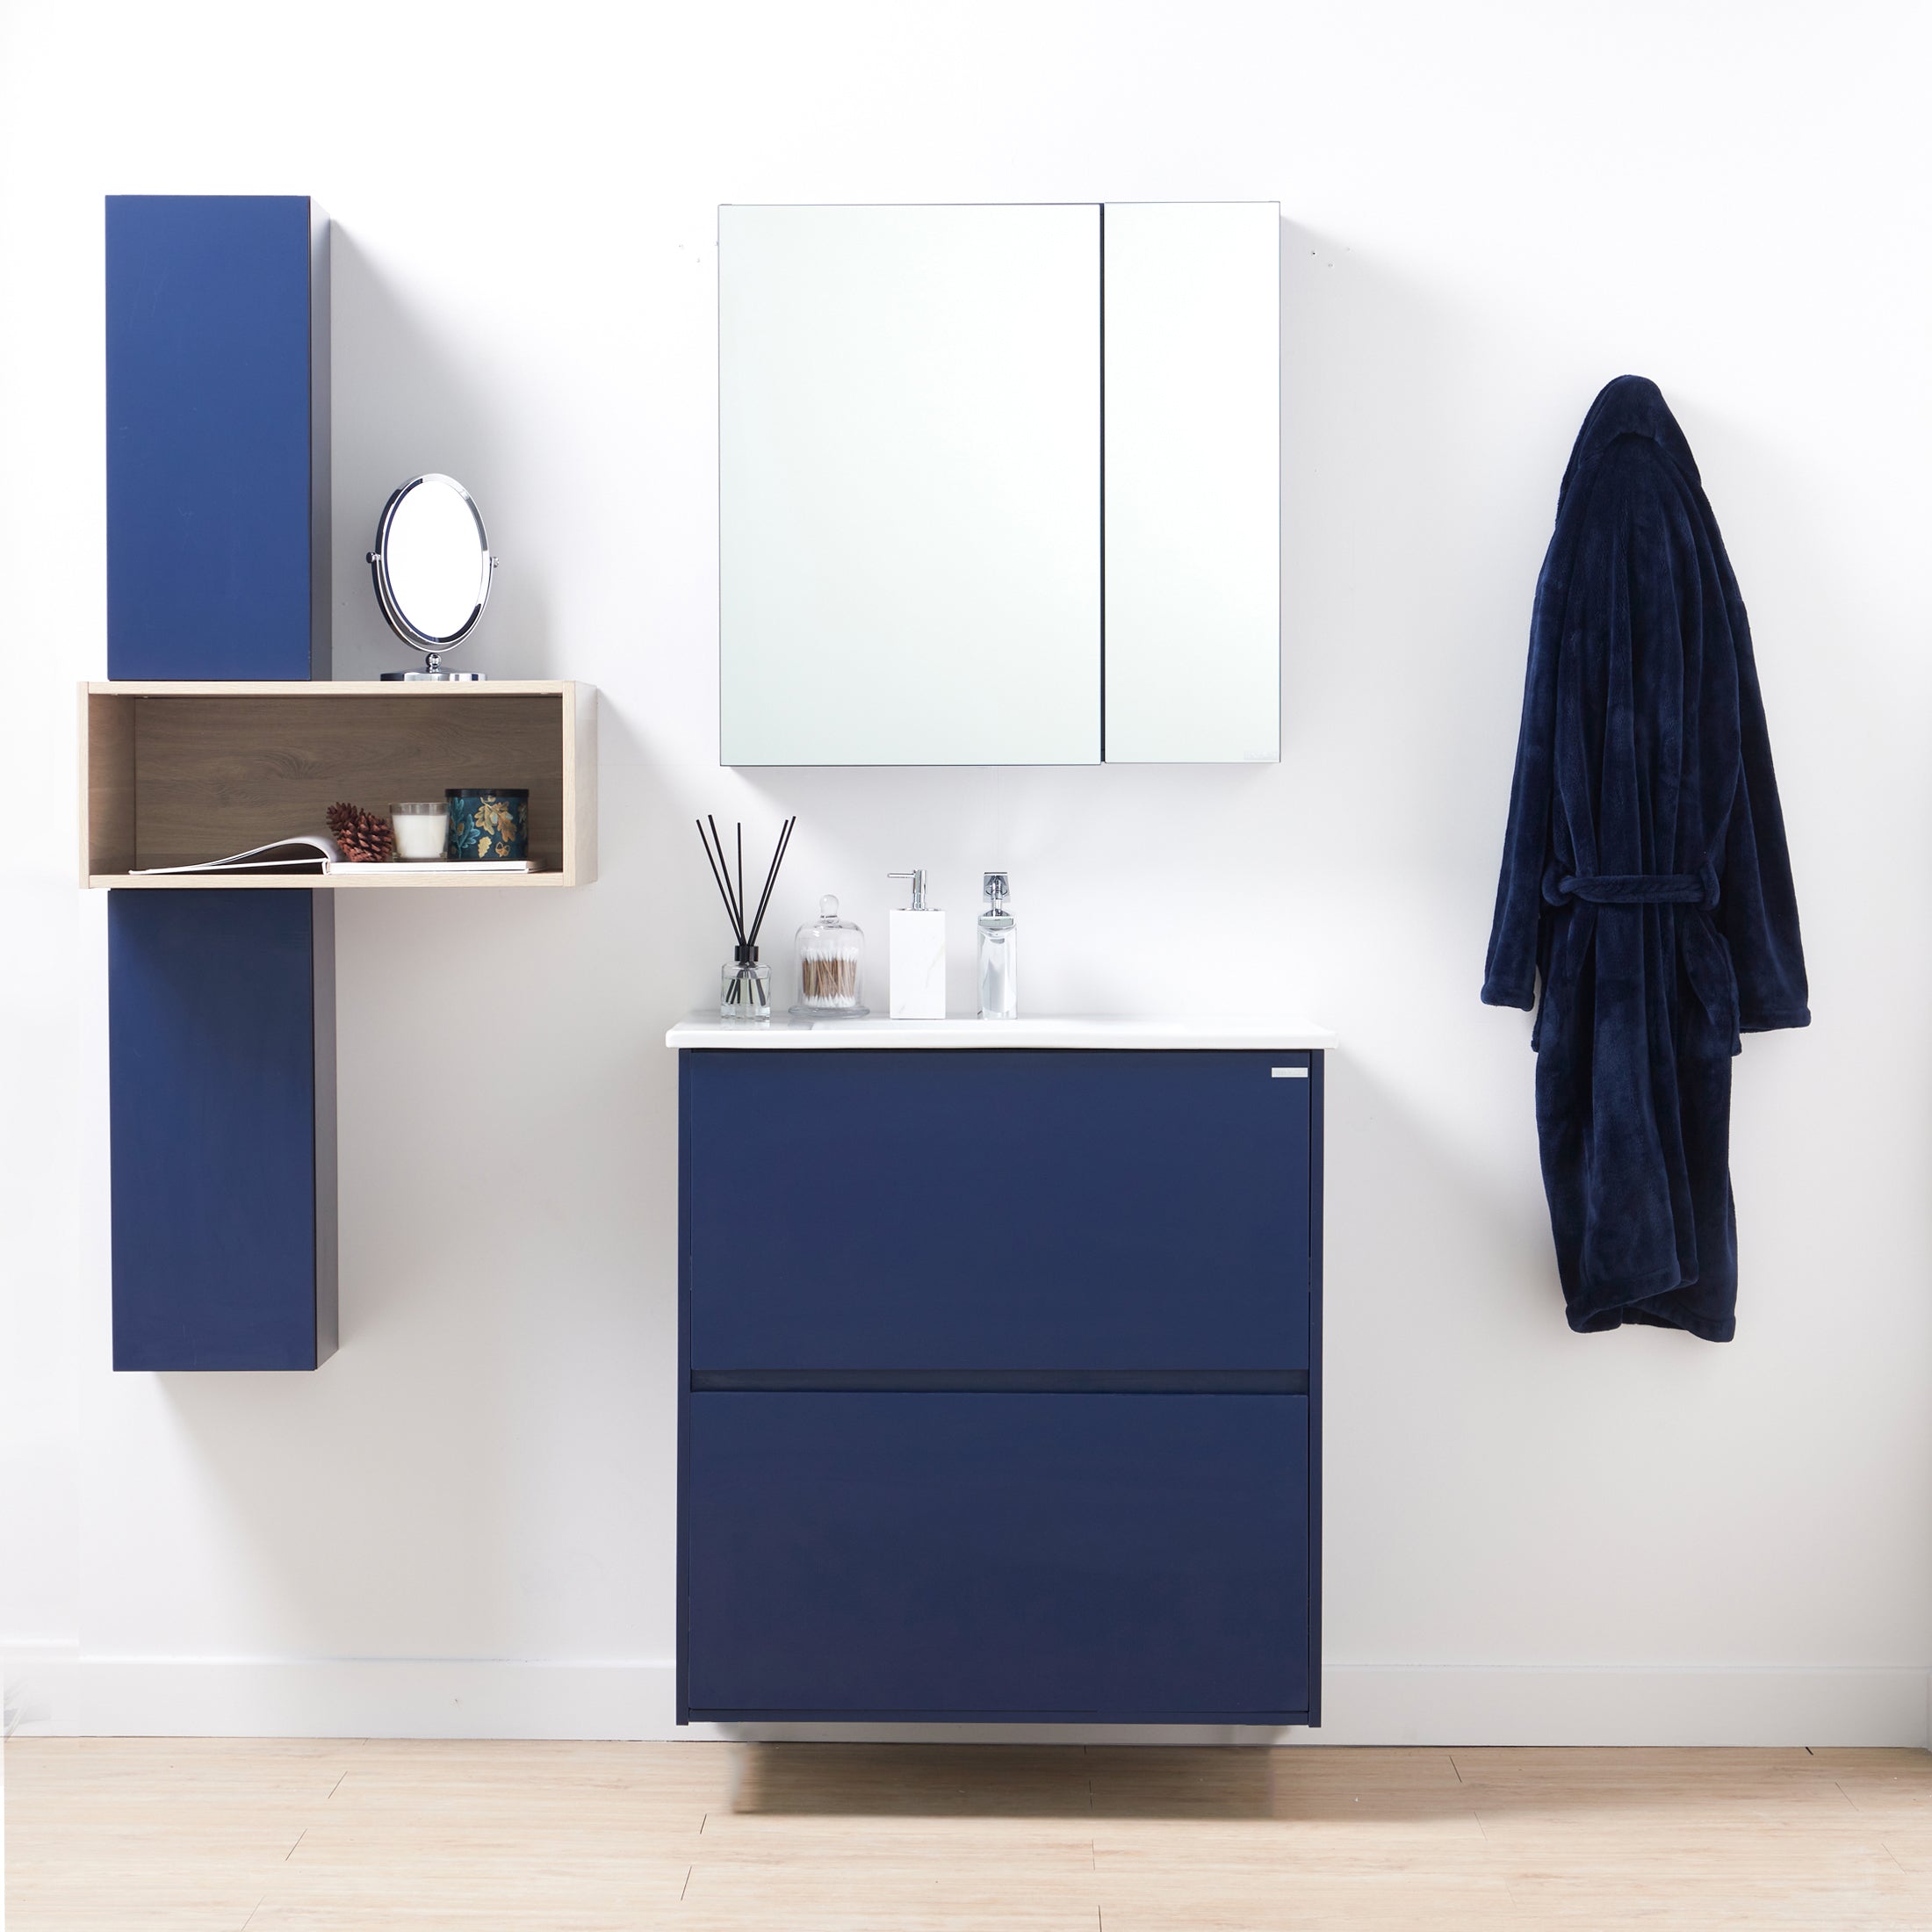 Glantis Bathroom Vanity Set, front-facing with bathroom décor & toiletries on counter and in cabinets